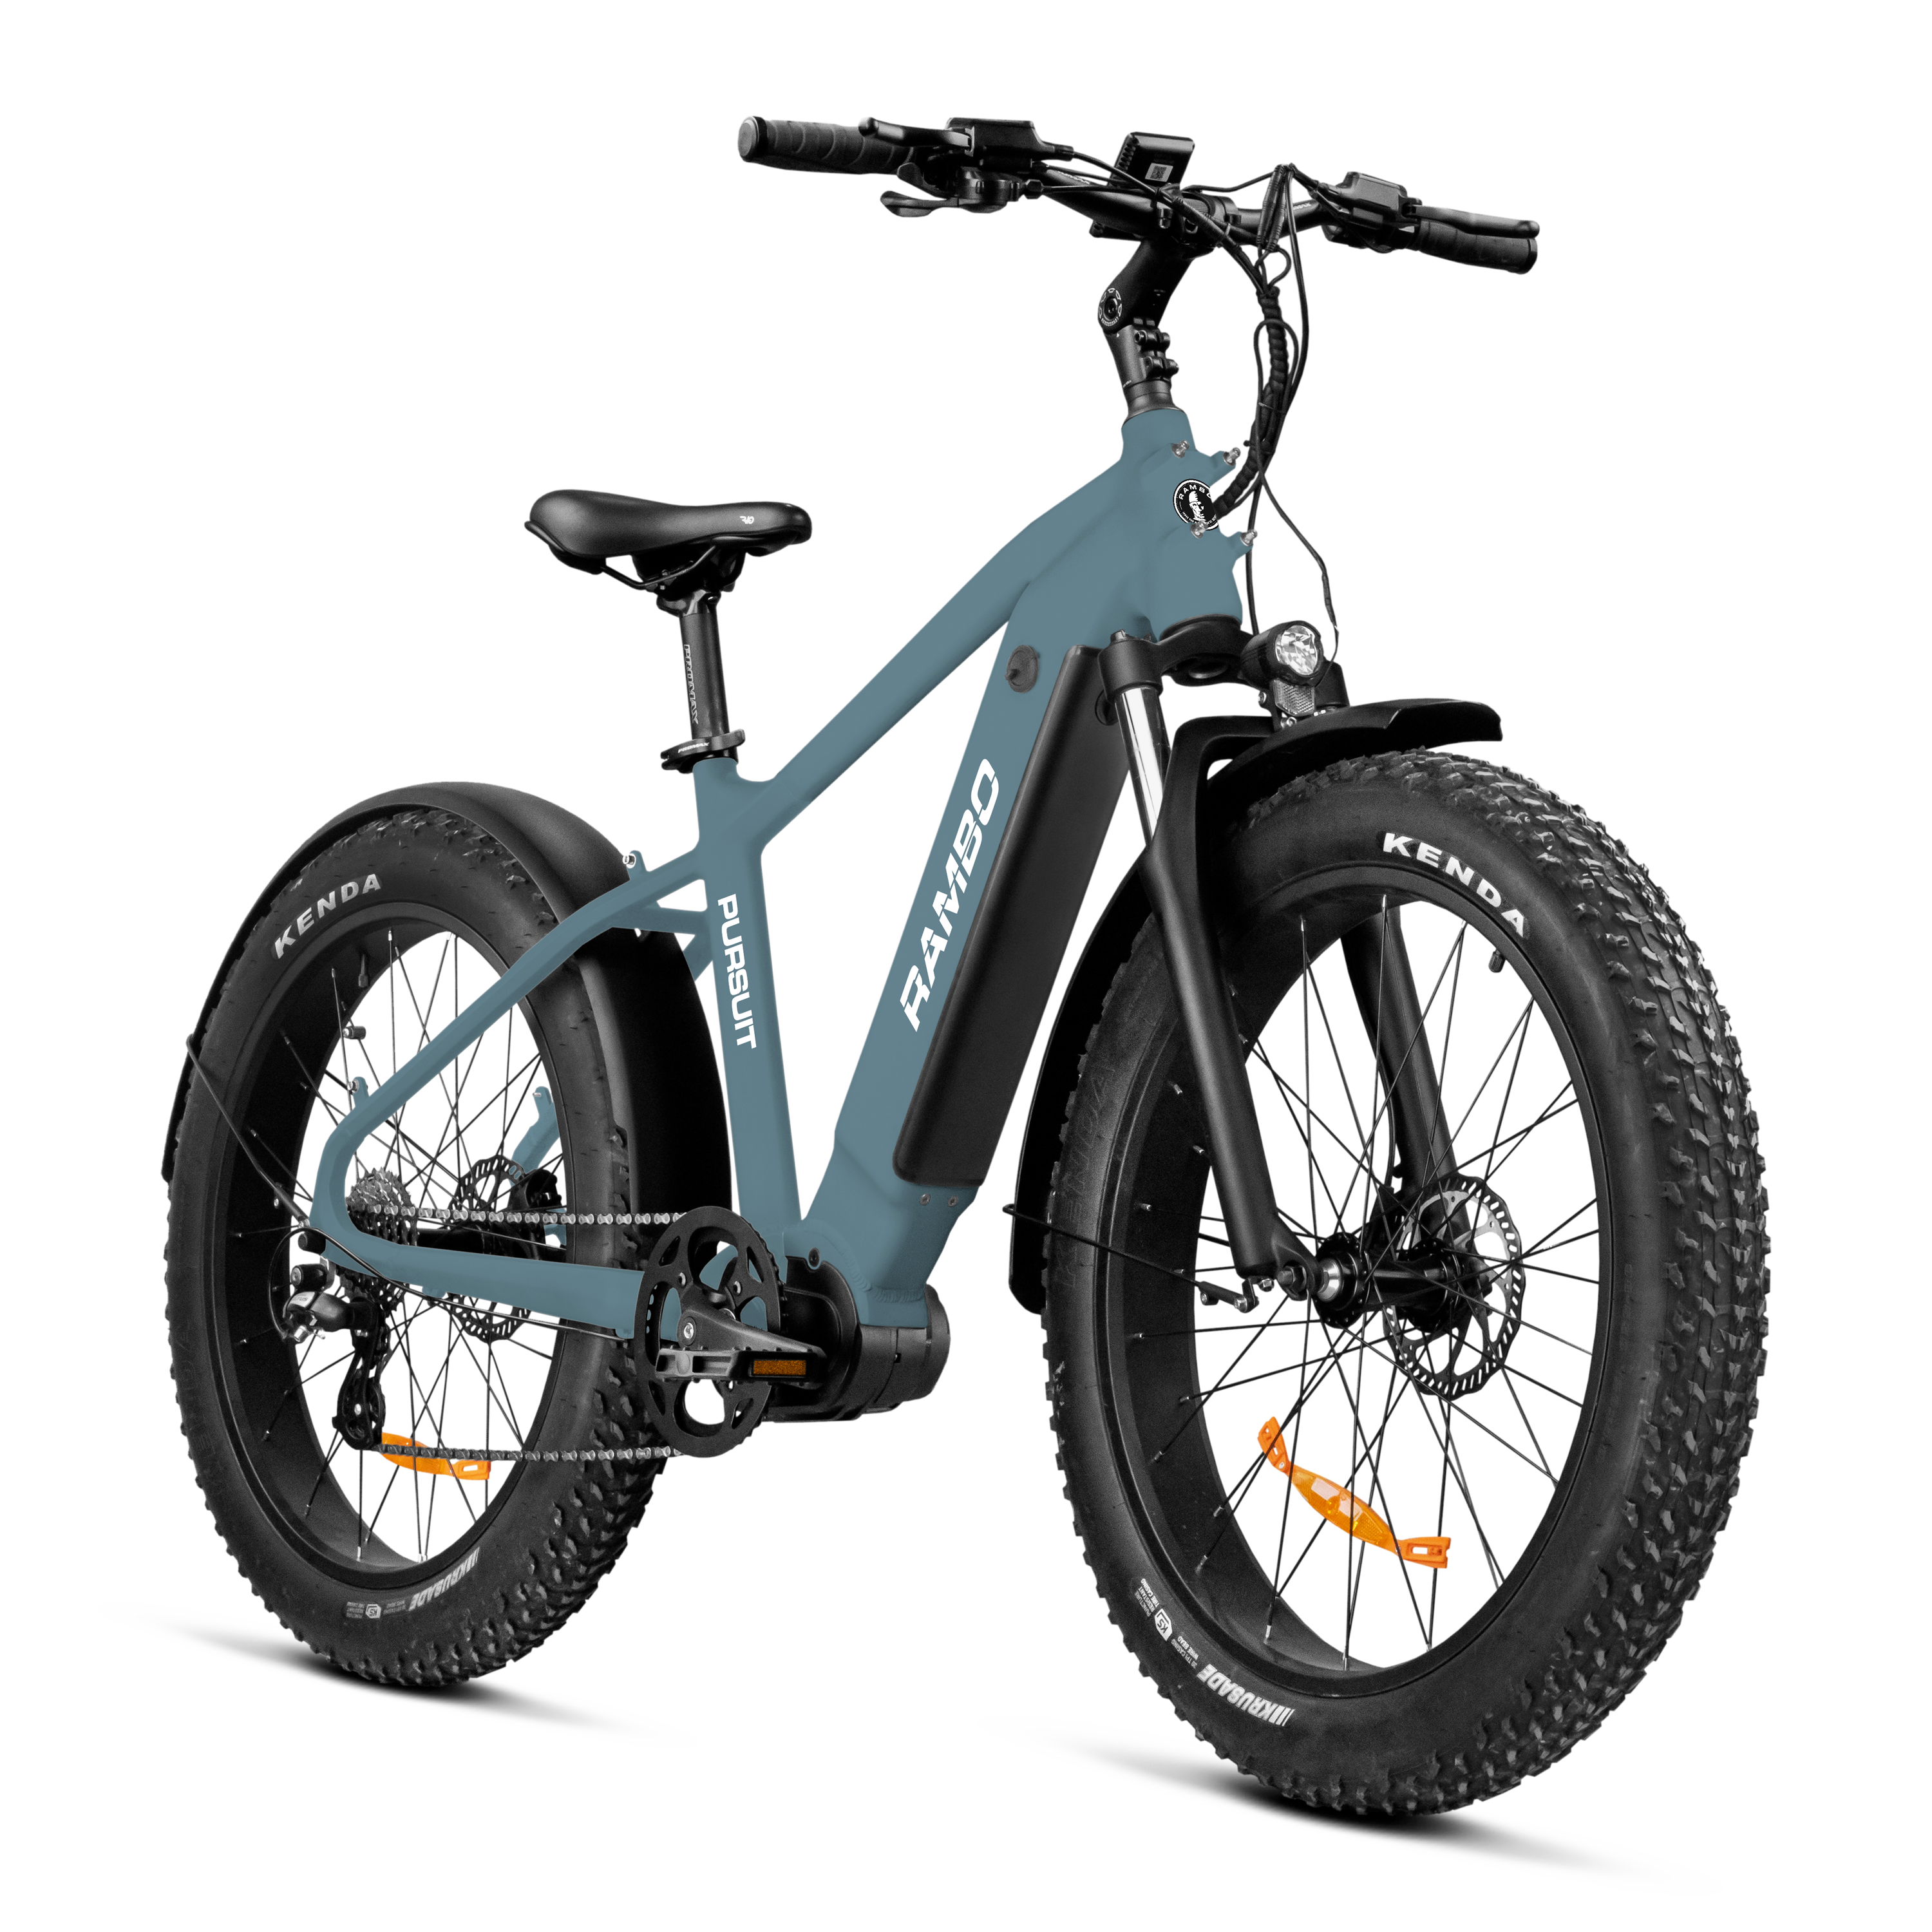 A frontal side-view of the grey coloured Pursuit ebike.